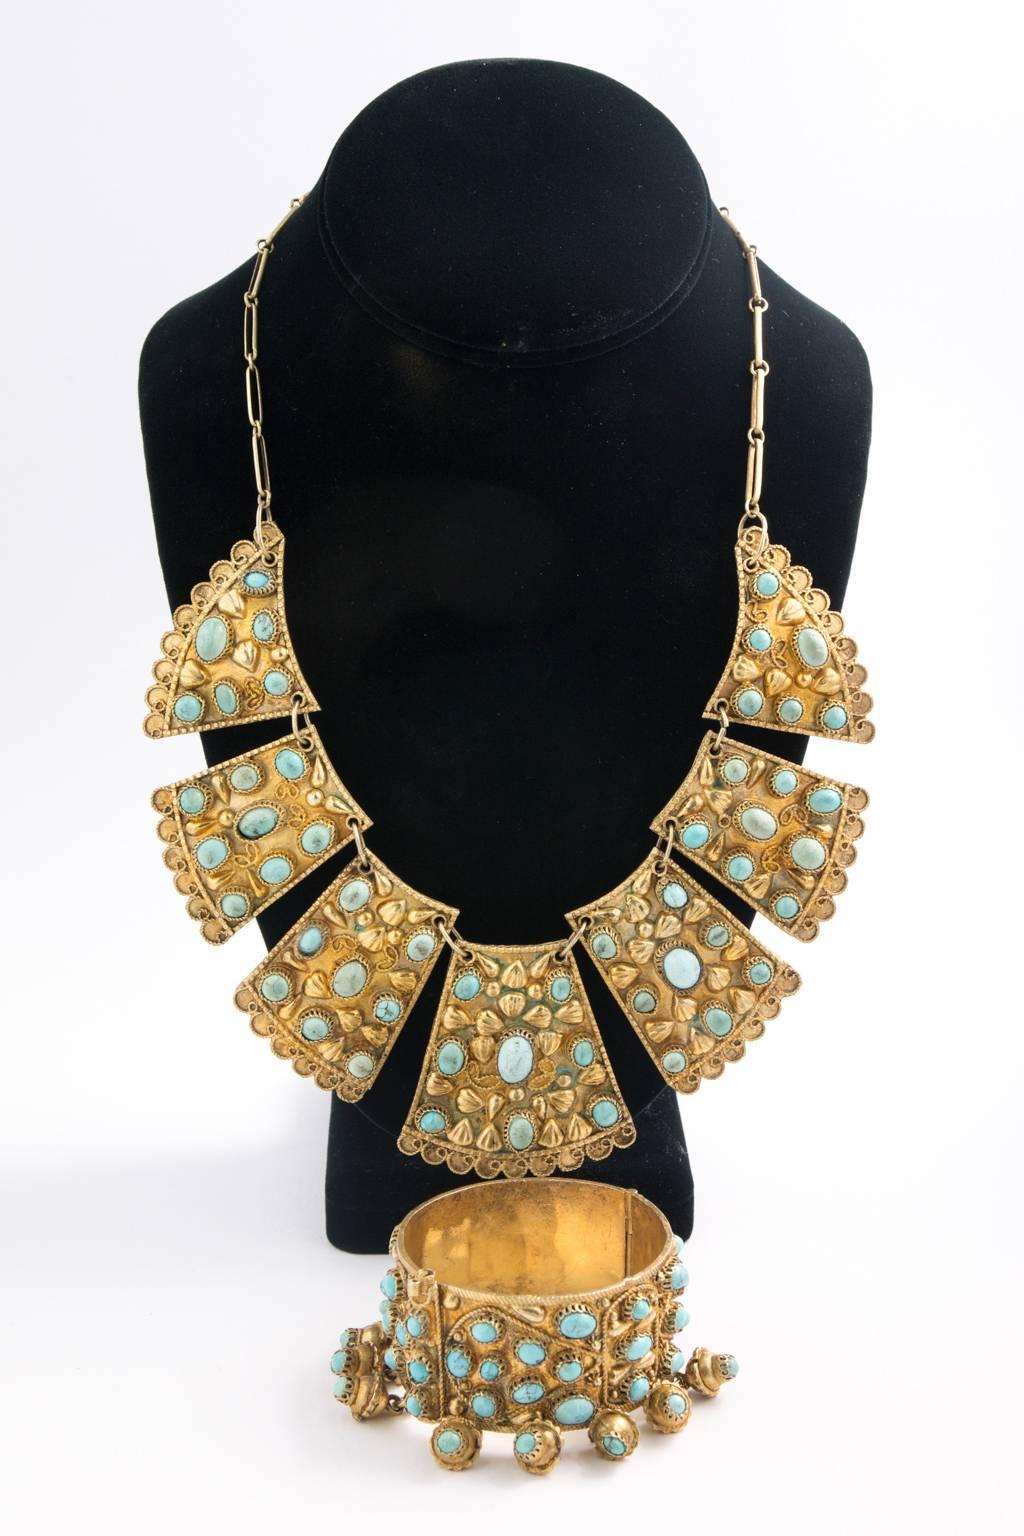 1920s Persian Bib Necklace In Excellent Condition For Sale In St.amford, CT